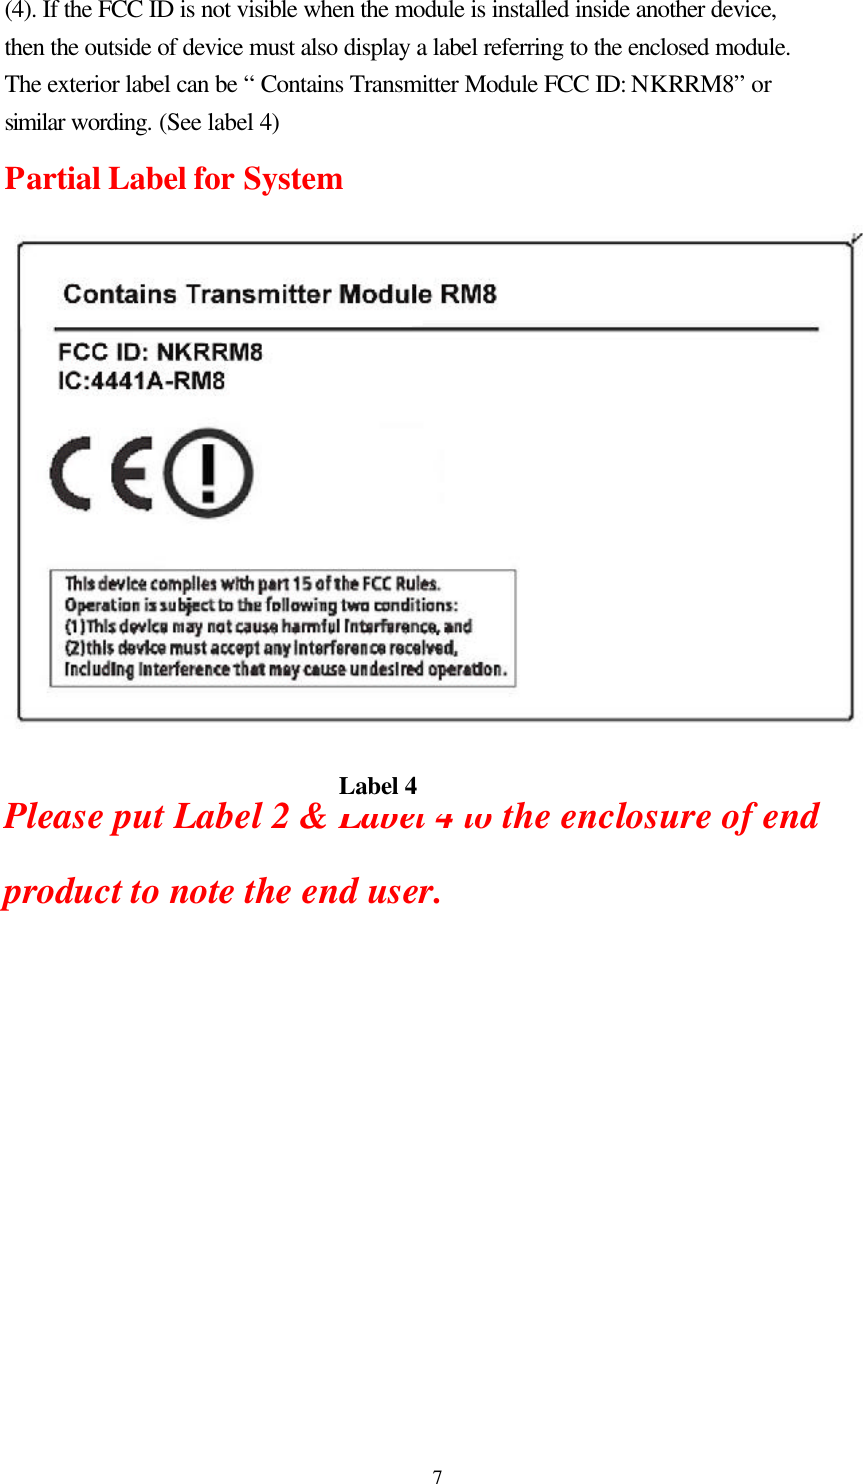  7(4). If the FCC ID is not visible when the module is installed inside another device, then the outside of device must also display a label referring to the enclosed module. The exterior label can be “ Contains Transmitter Module FCC ID: NKRRM8” or similar wording. (See label 4) Partial Label for System     Please put Label 2 &amp; Label 4 to the enclosure of end product to note the end user.  Label 4 